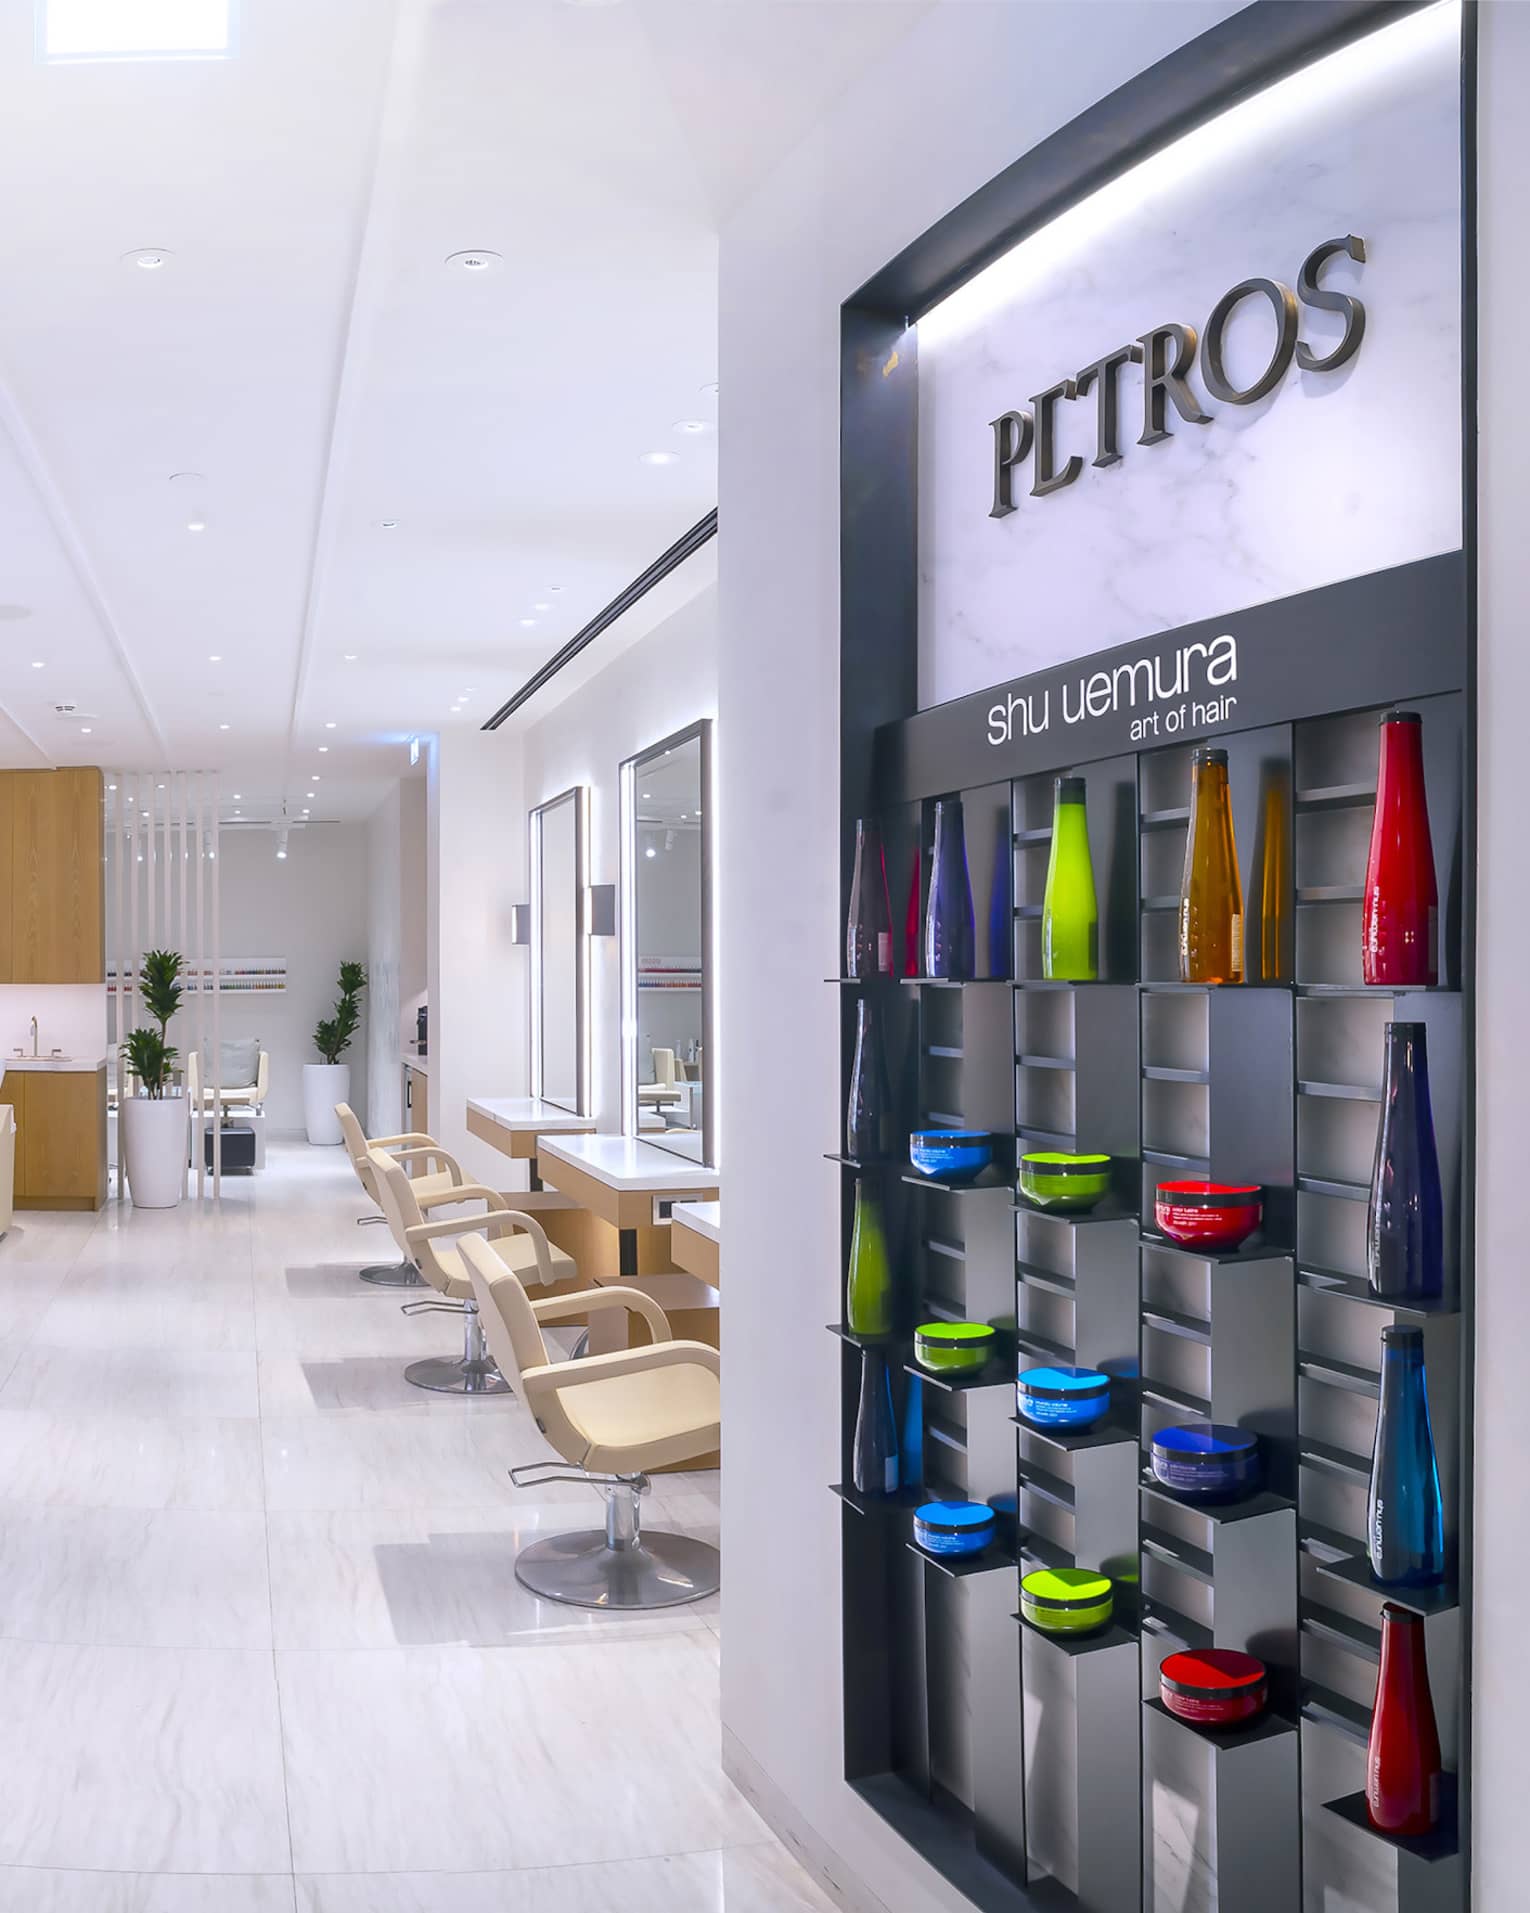 Petros Hair Salon reception desk with hair products on wall and view into salon